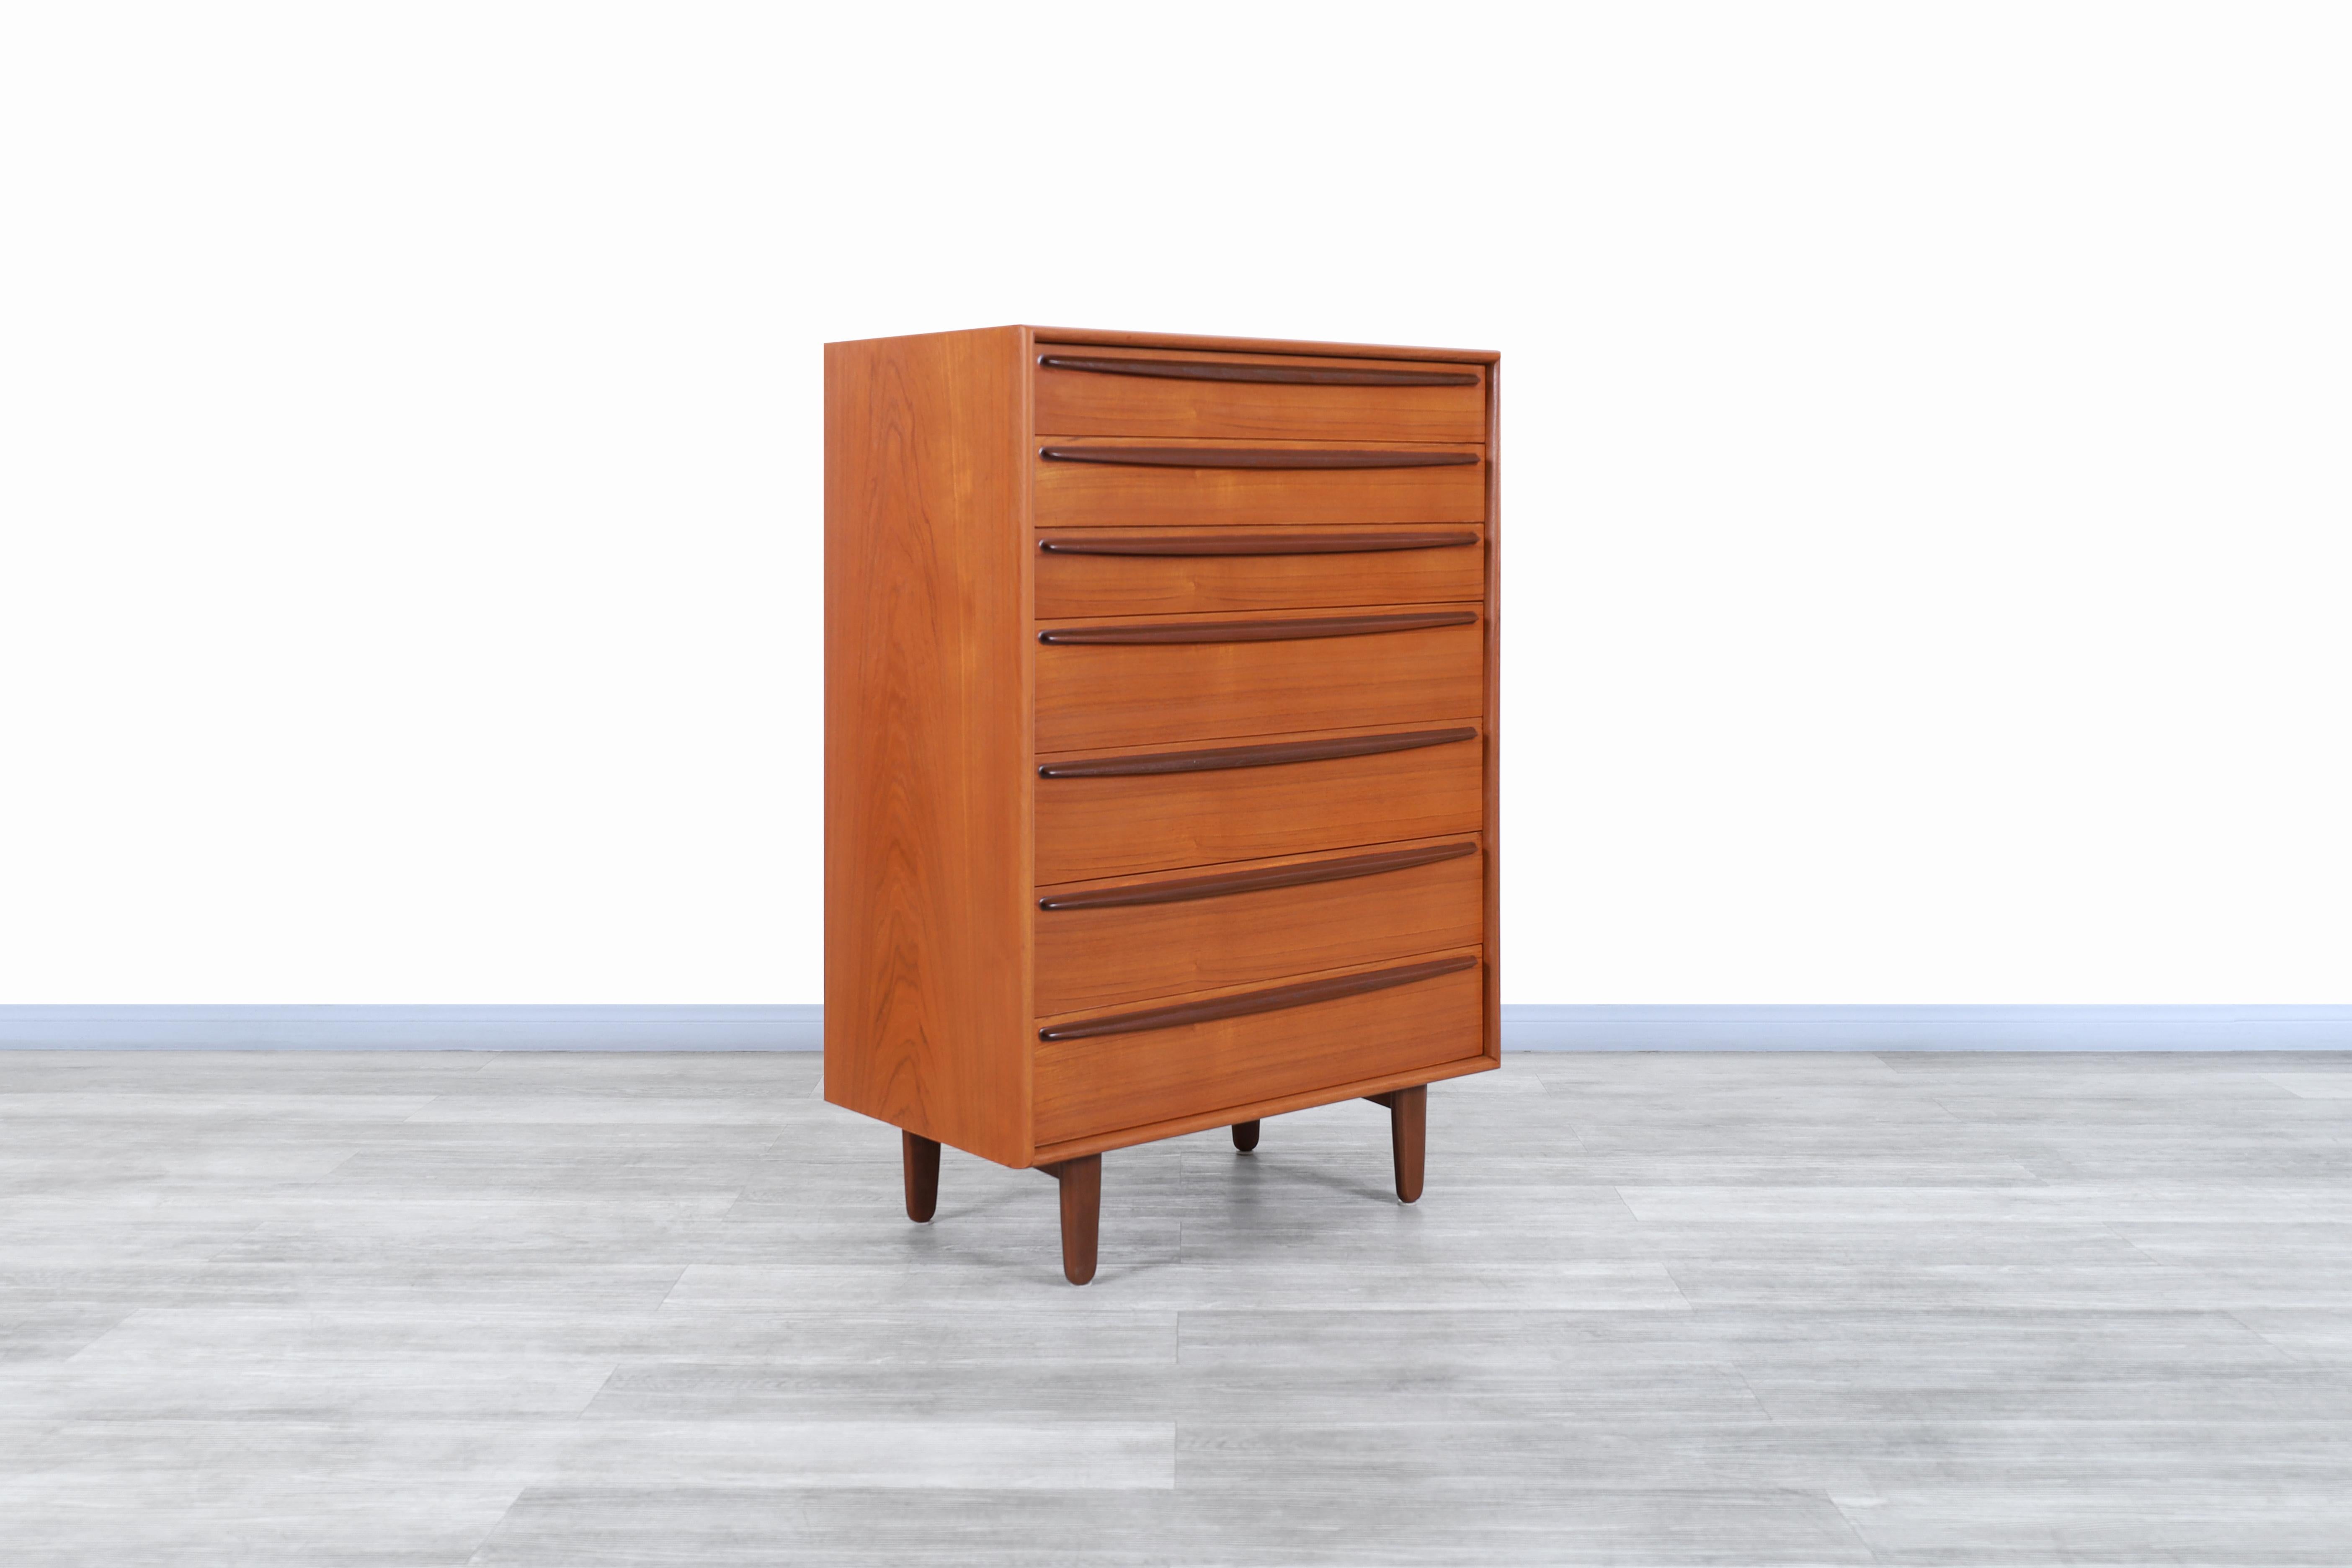 Wonderful Danish modern teak highboy designed by Svend Age Madsen for Falster Møbelfabrik in Denmark, circa 1960s. This highboy has a conservative design but stands out thanks to the grains of the teak wood that contrast perfectly. Features a total